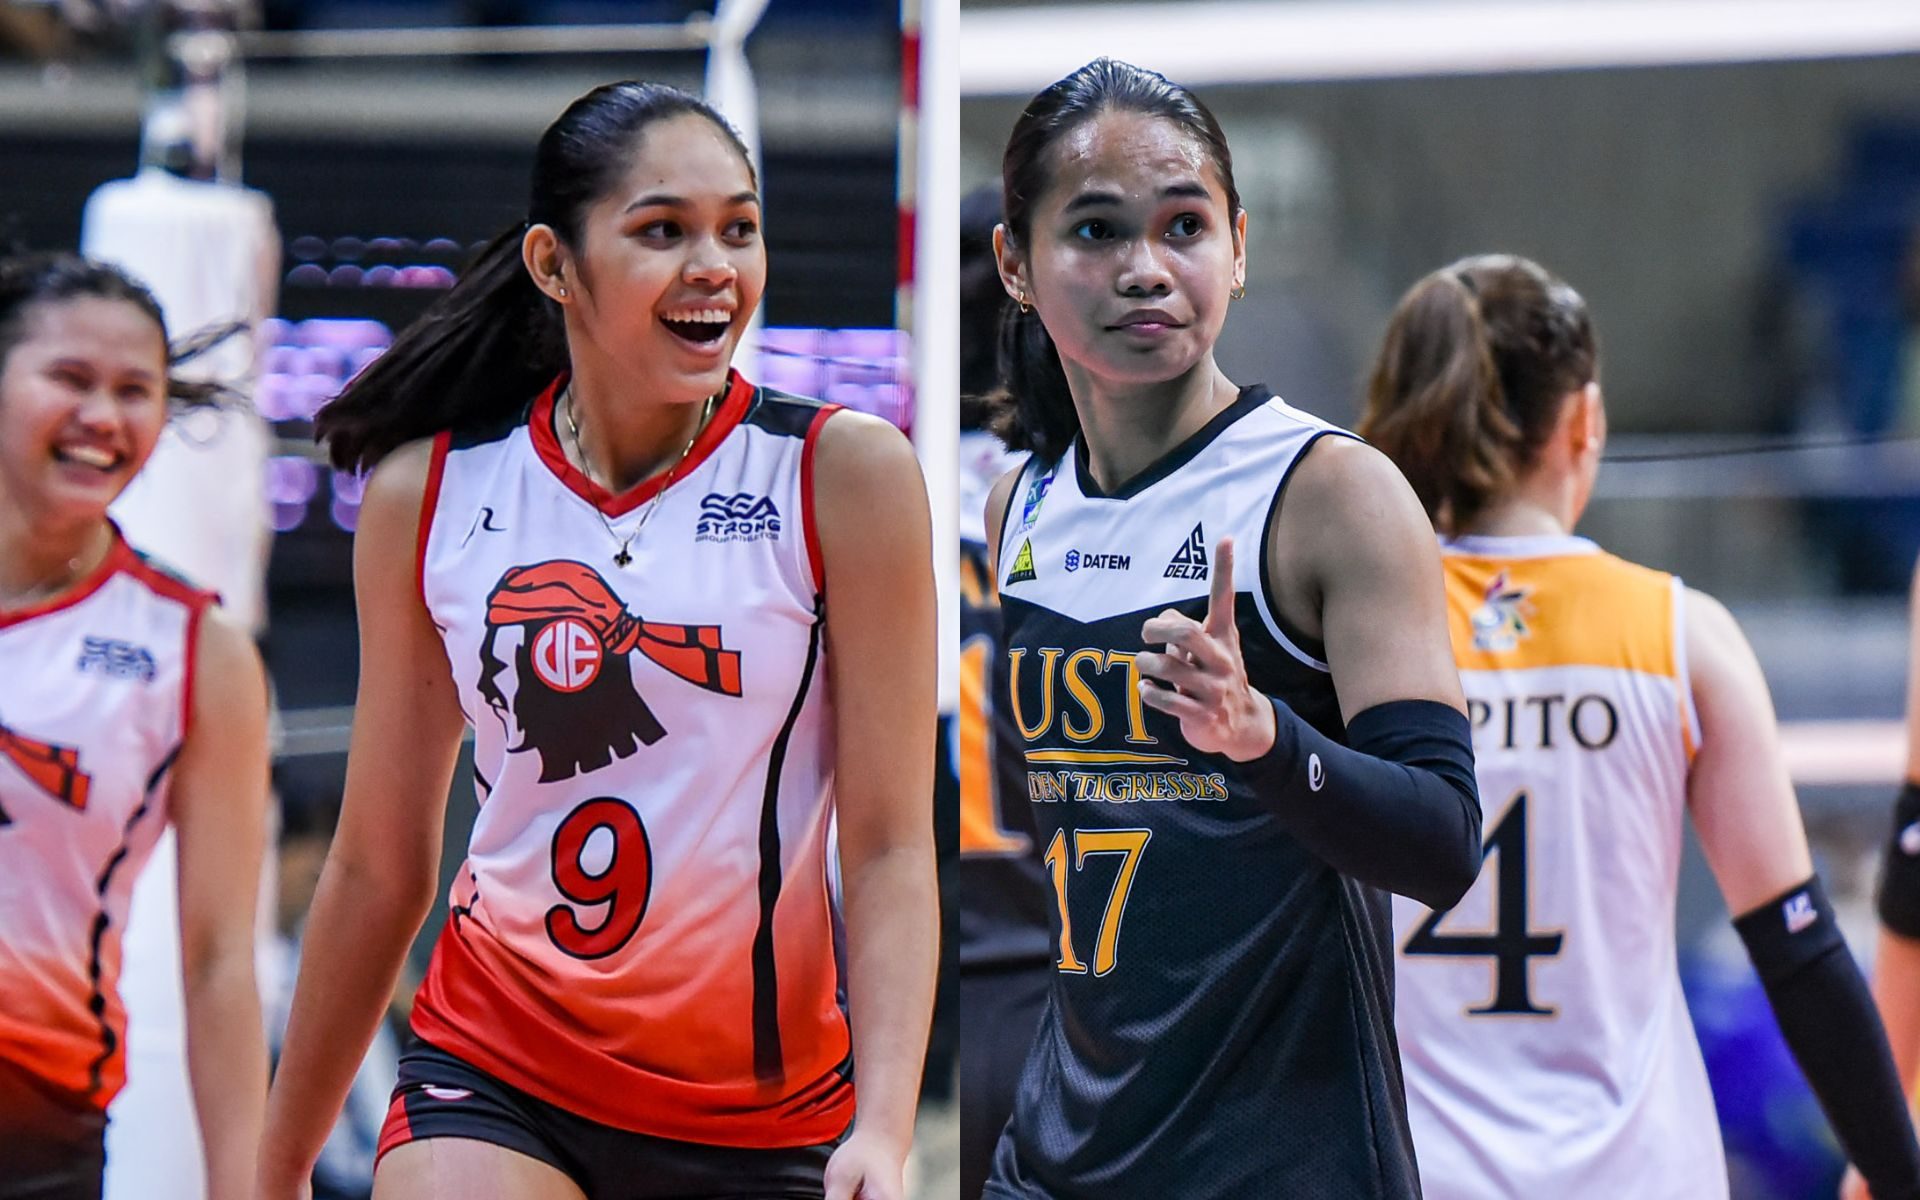 Bright future: Super rookies Dongallo, Poyos trade praises after first UAAP showdown